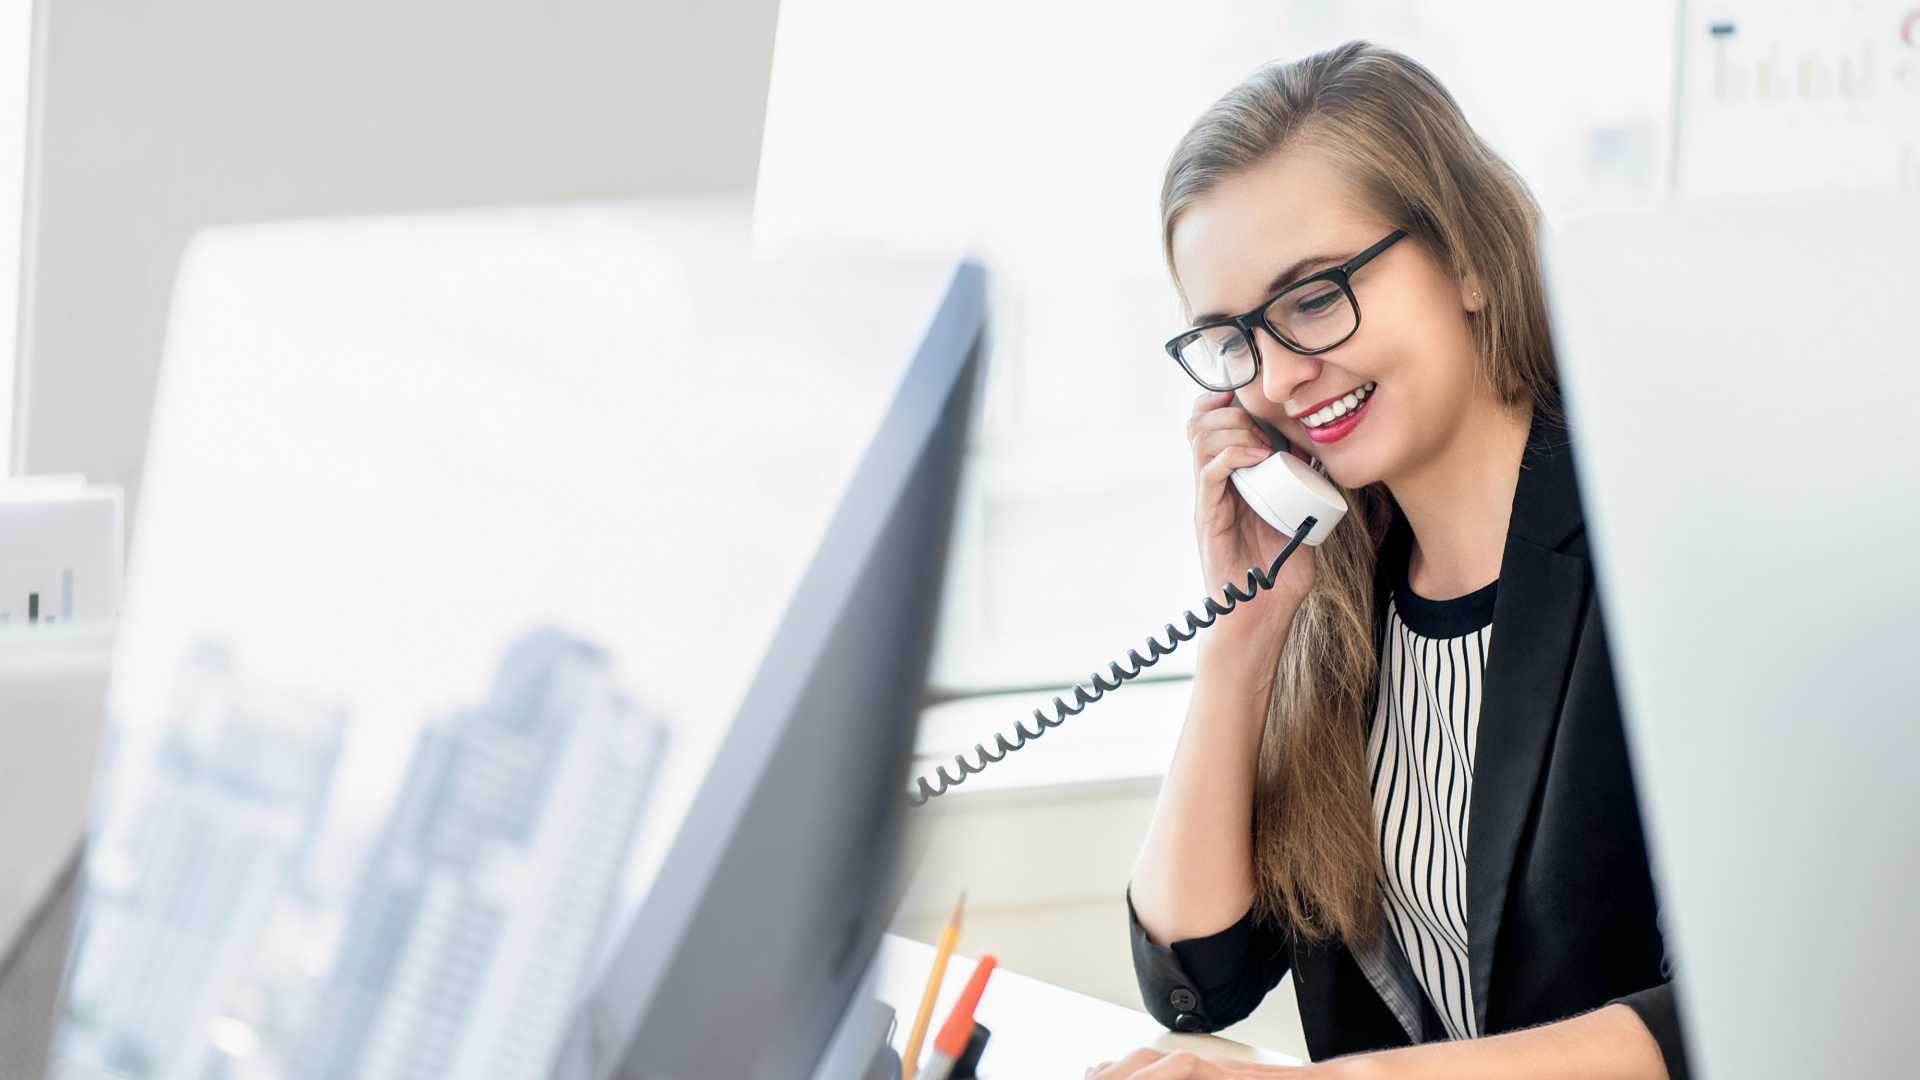 Master These 3 Skills as a Customer Service Rep